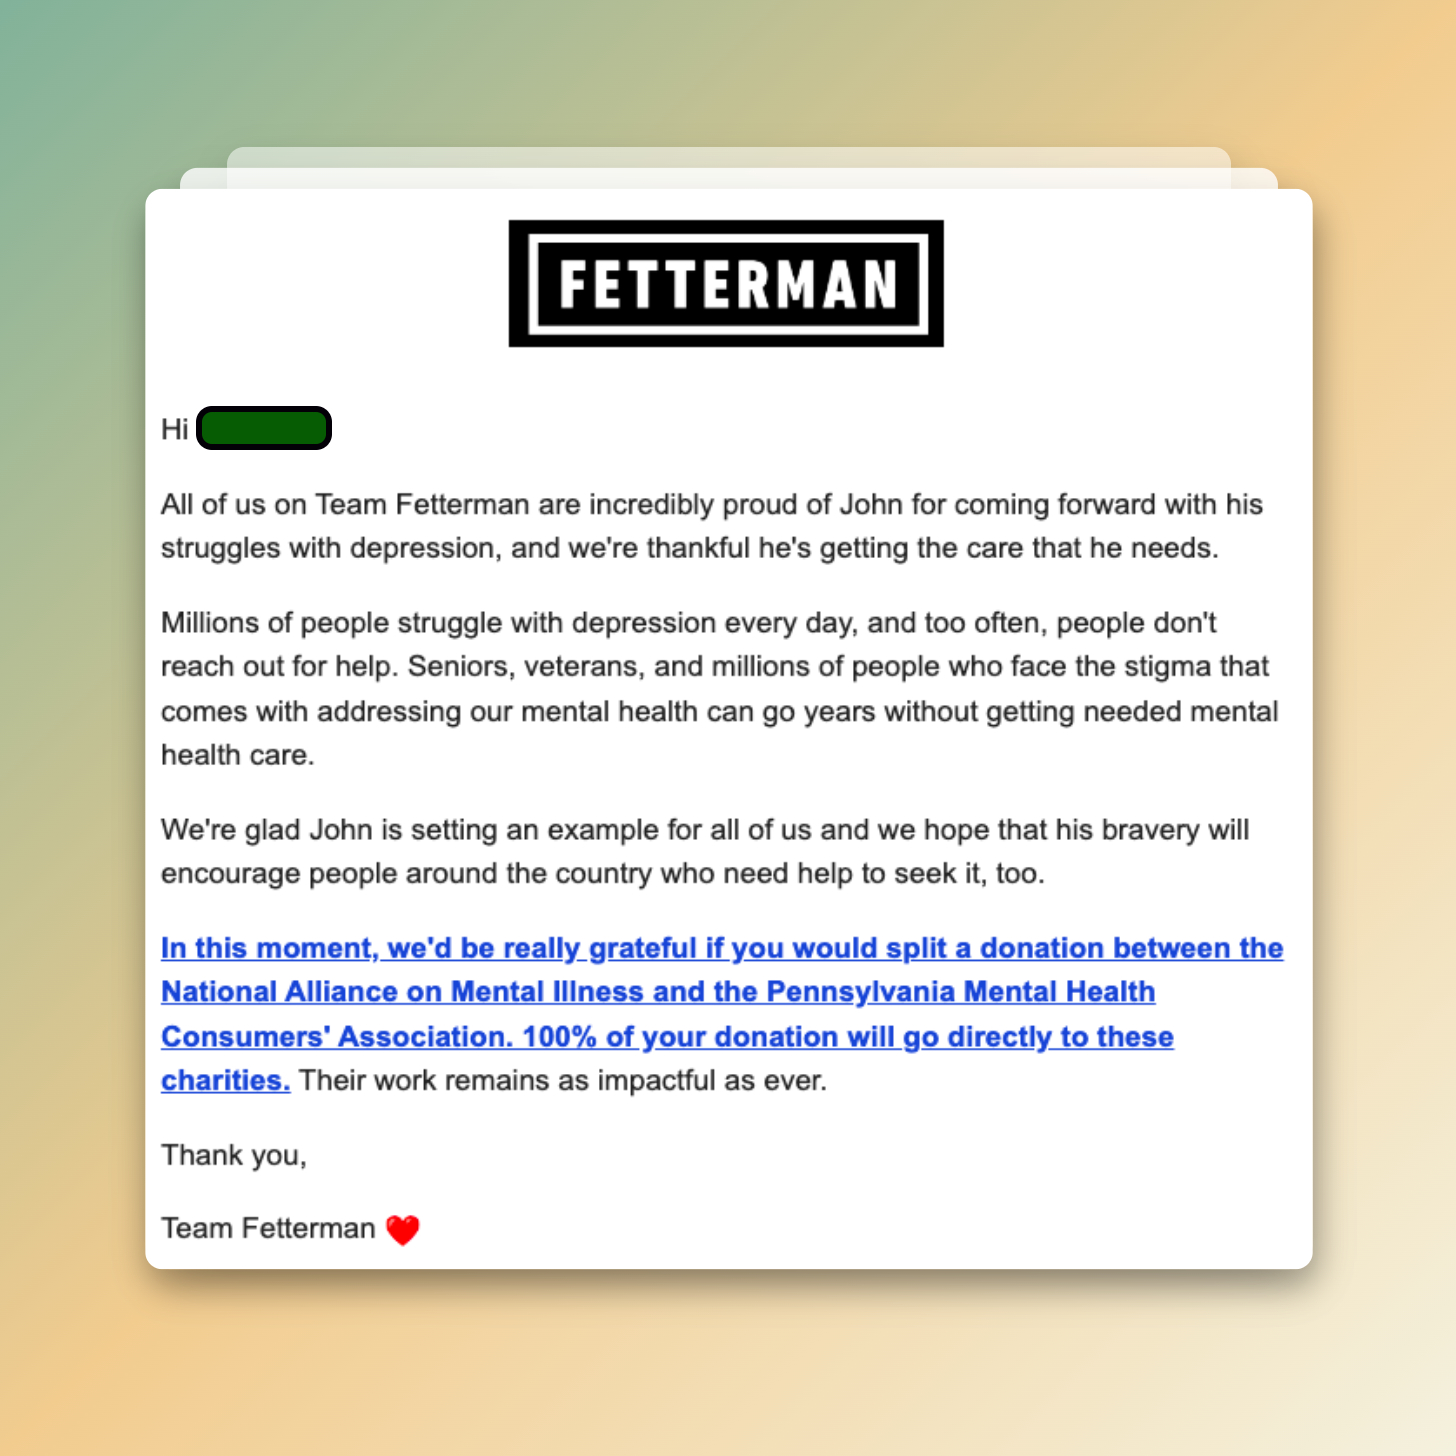 Fetterman Email Screenshot: Hi All of us on Team Fetterman are incredibly proud of John for coming forward with his struggles with depression, and we're thankful he's getting the care that he needs. Millions of people struggle with depression every day, and too often, people don't reach out for help. Seniors, veterans, and millions of people who face the stigma that comes with addressing our mental health can go years without getting needed mental health care. We're glad John is setting an example for all of us and we hope that his bravery will encourage people around the country who need help to seek it, too. In this moment, we'd be really grateful if you would split a donation between the National Alliance on Mental Illness and the Pennsylvania Mental Health Consumers' Association. 100% of your donation will go directly to these charities. Their work remains as impactful as ever. Thank you, Team Fetterman <3